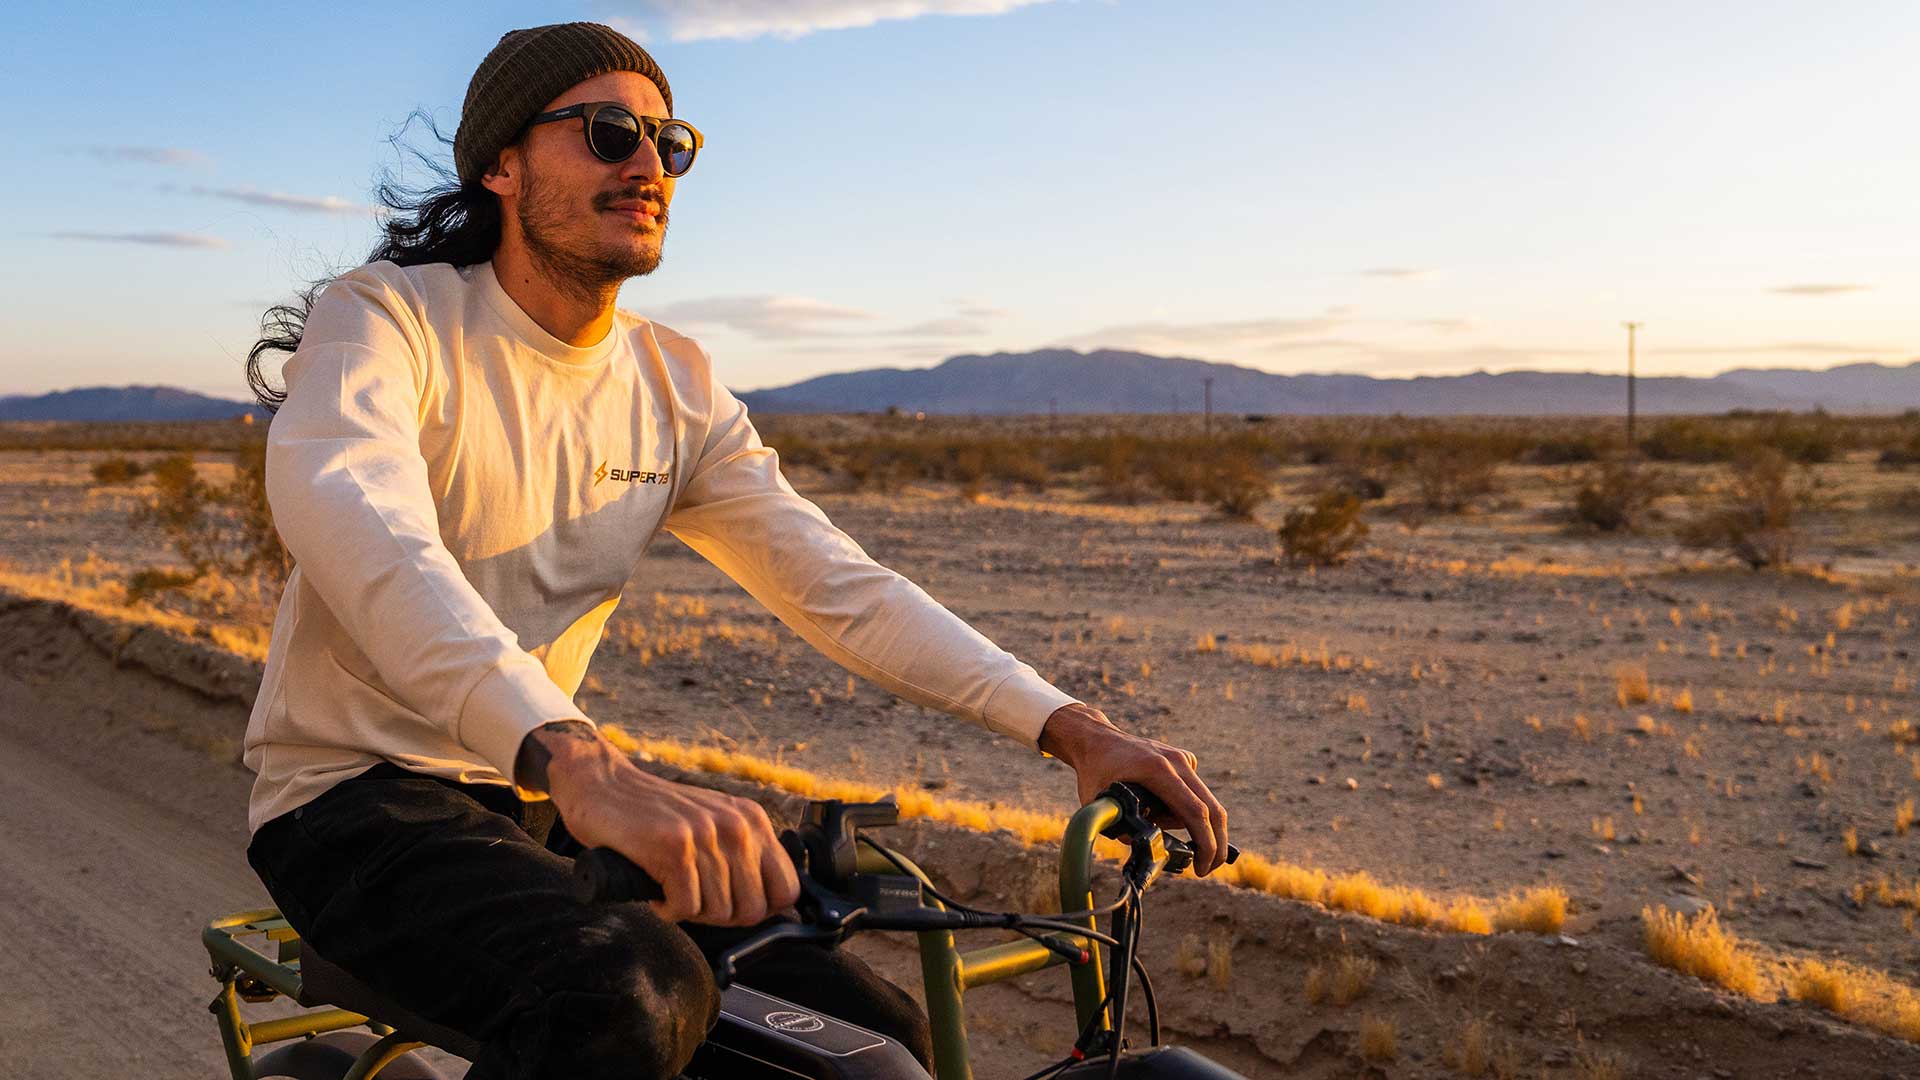 Closeup of rider wearing Super73 long sleeve t-shirt and riding Super73 ebike on a desert highway with wind in the hair